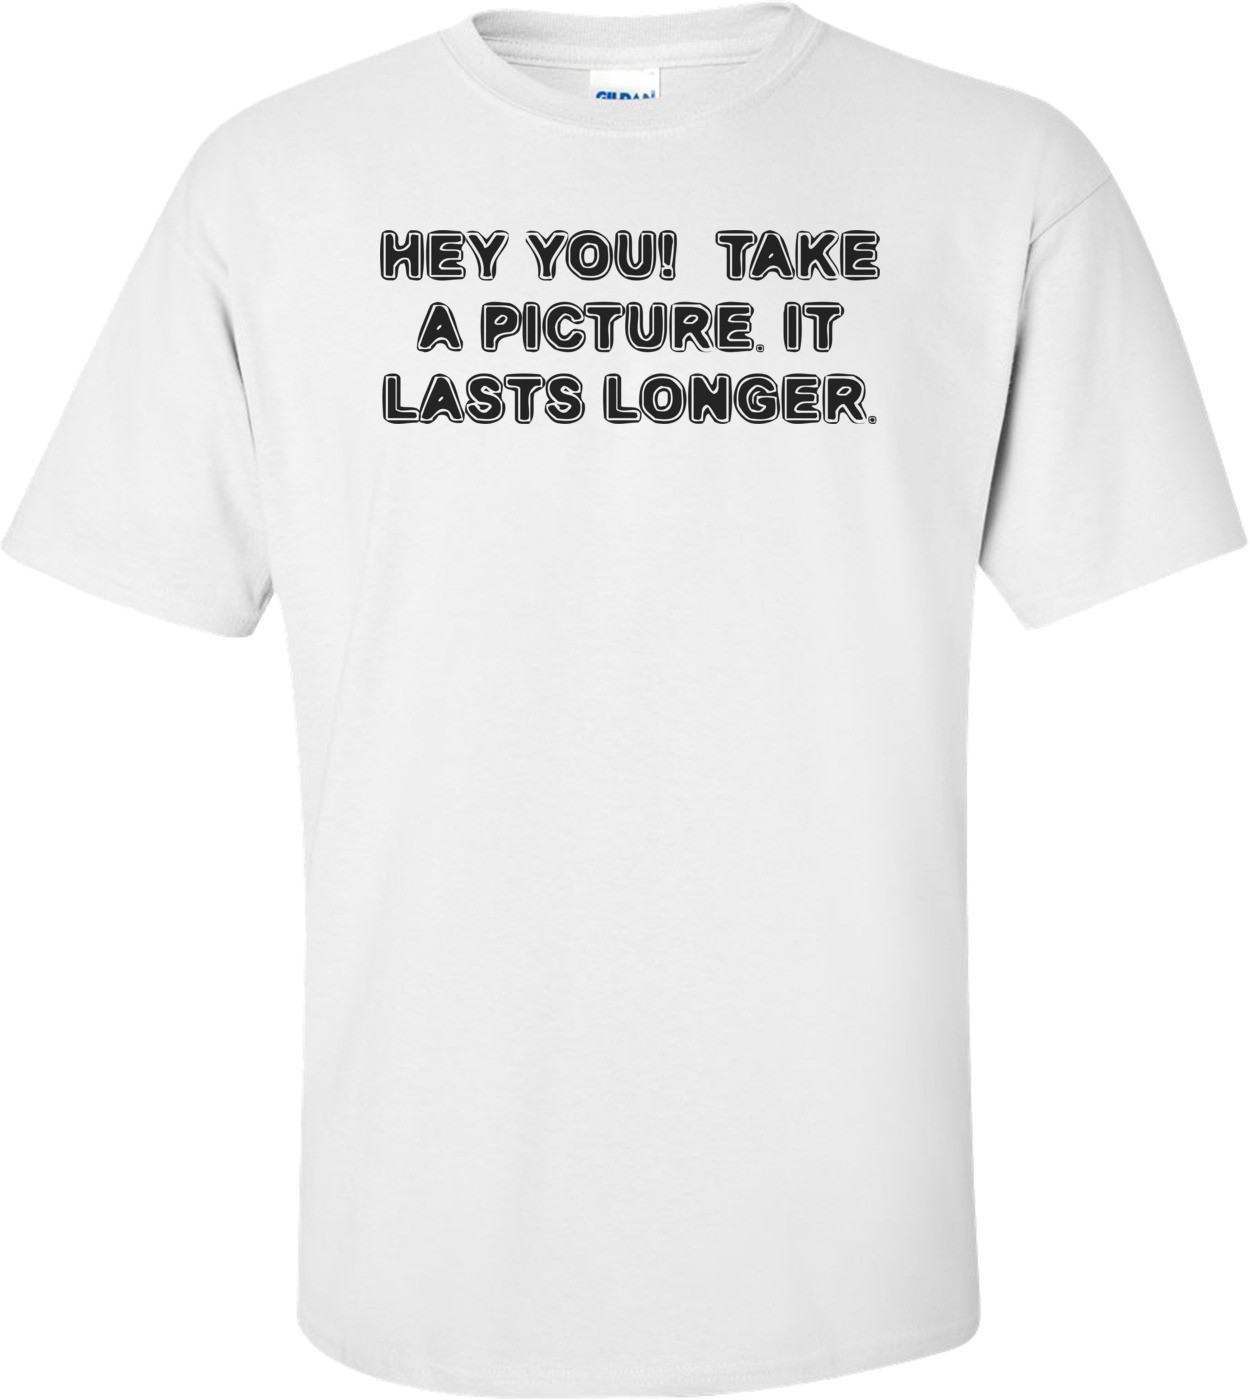 HEY YOU!  TAKE A PICTURE. IT LASTS LONGER. Shirt